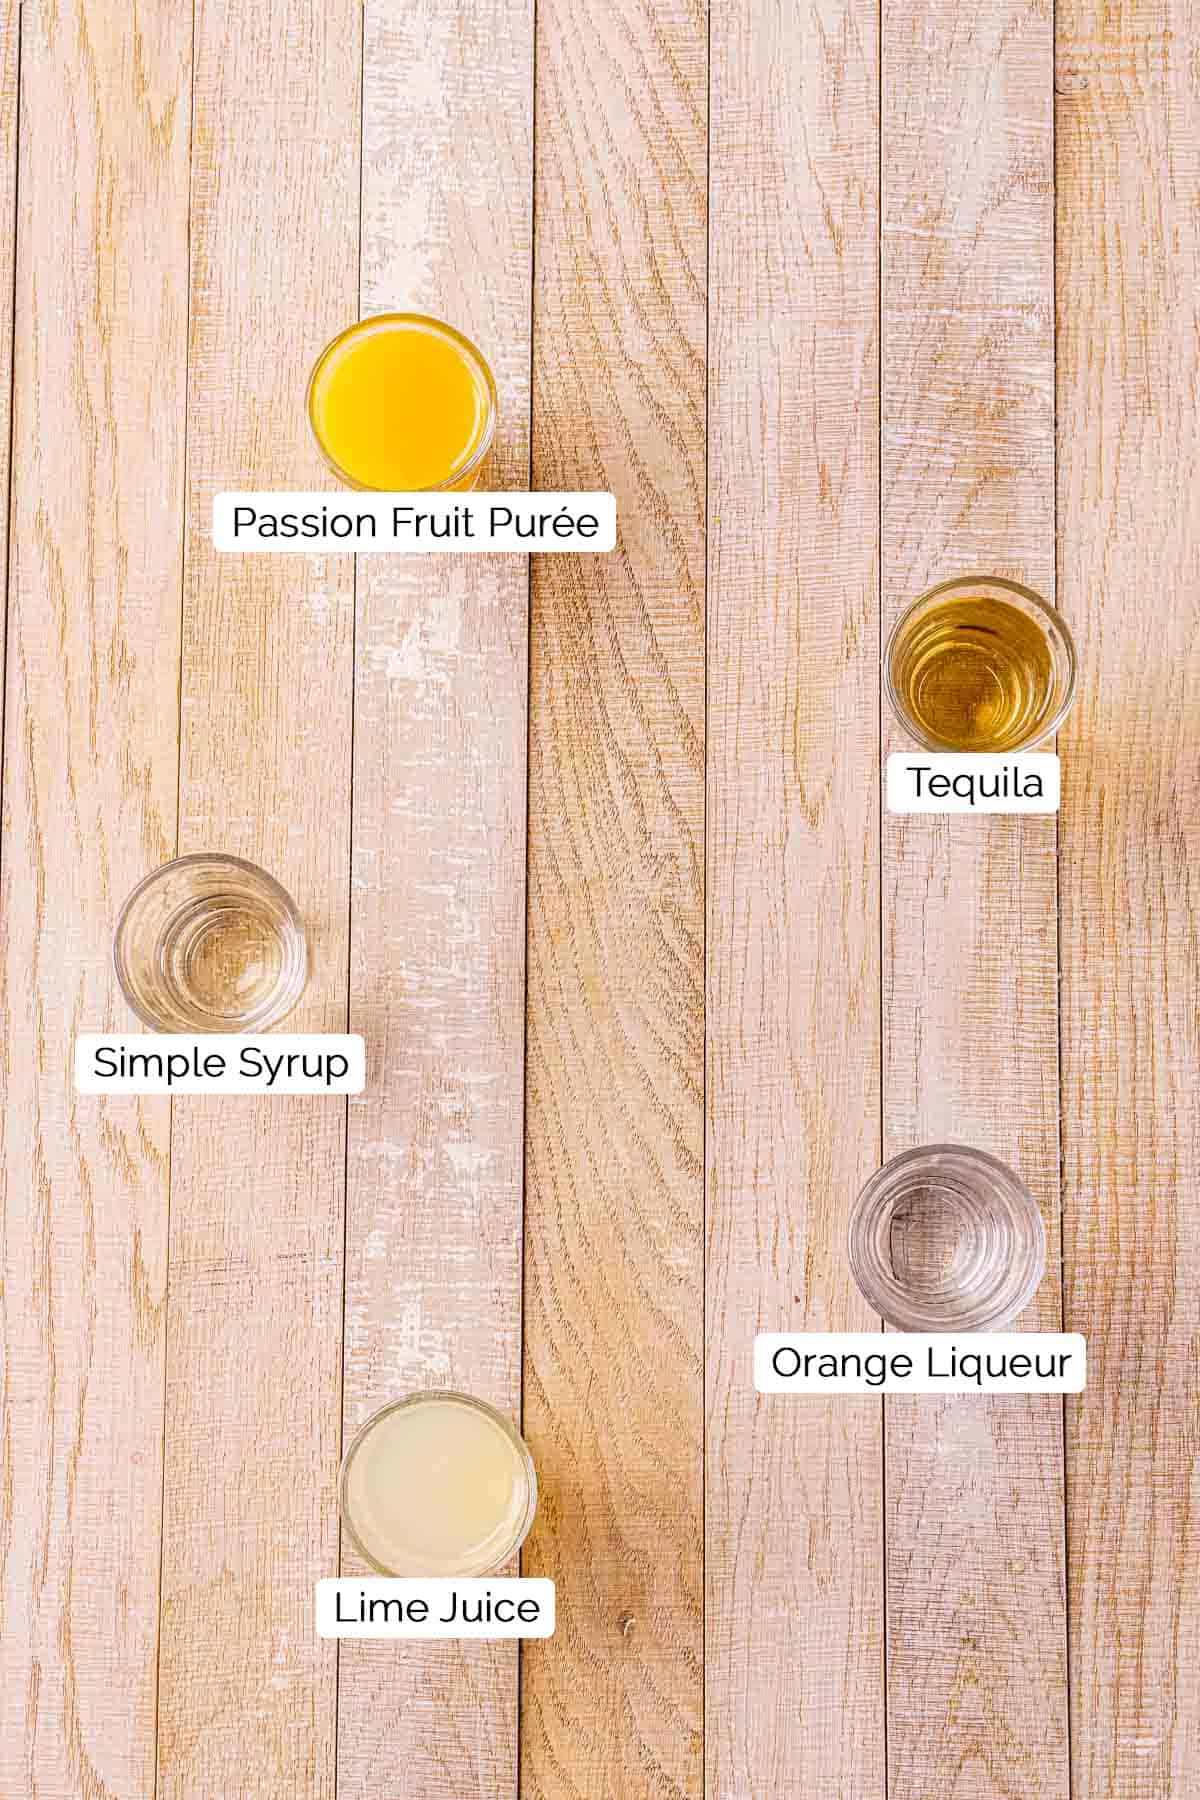 The drink ingredients in shot glasses on a cream-colored wooden board with black and white labels underneath each item.